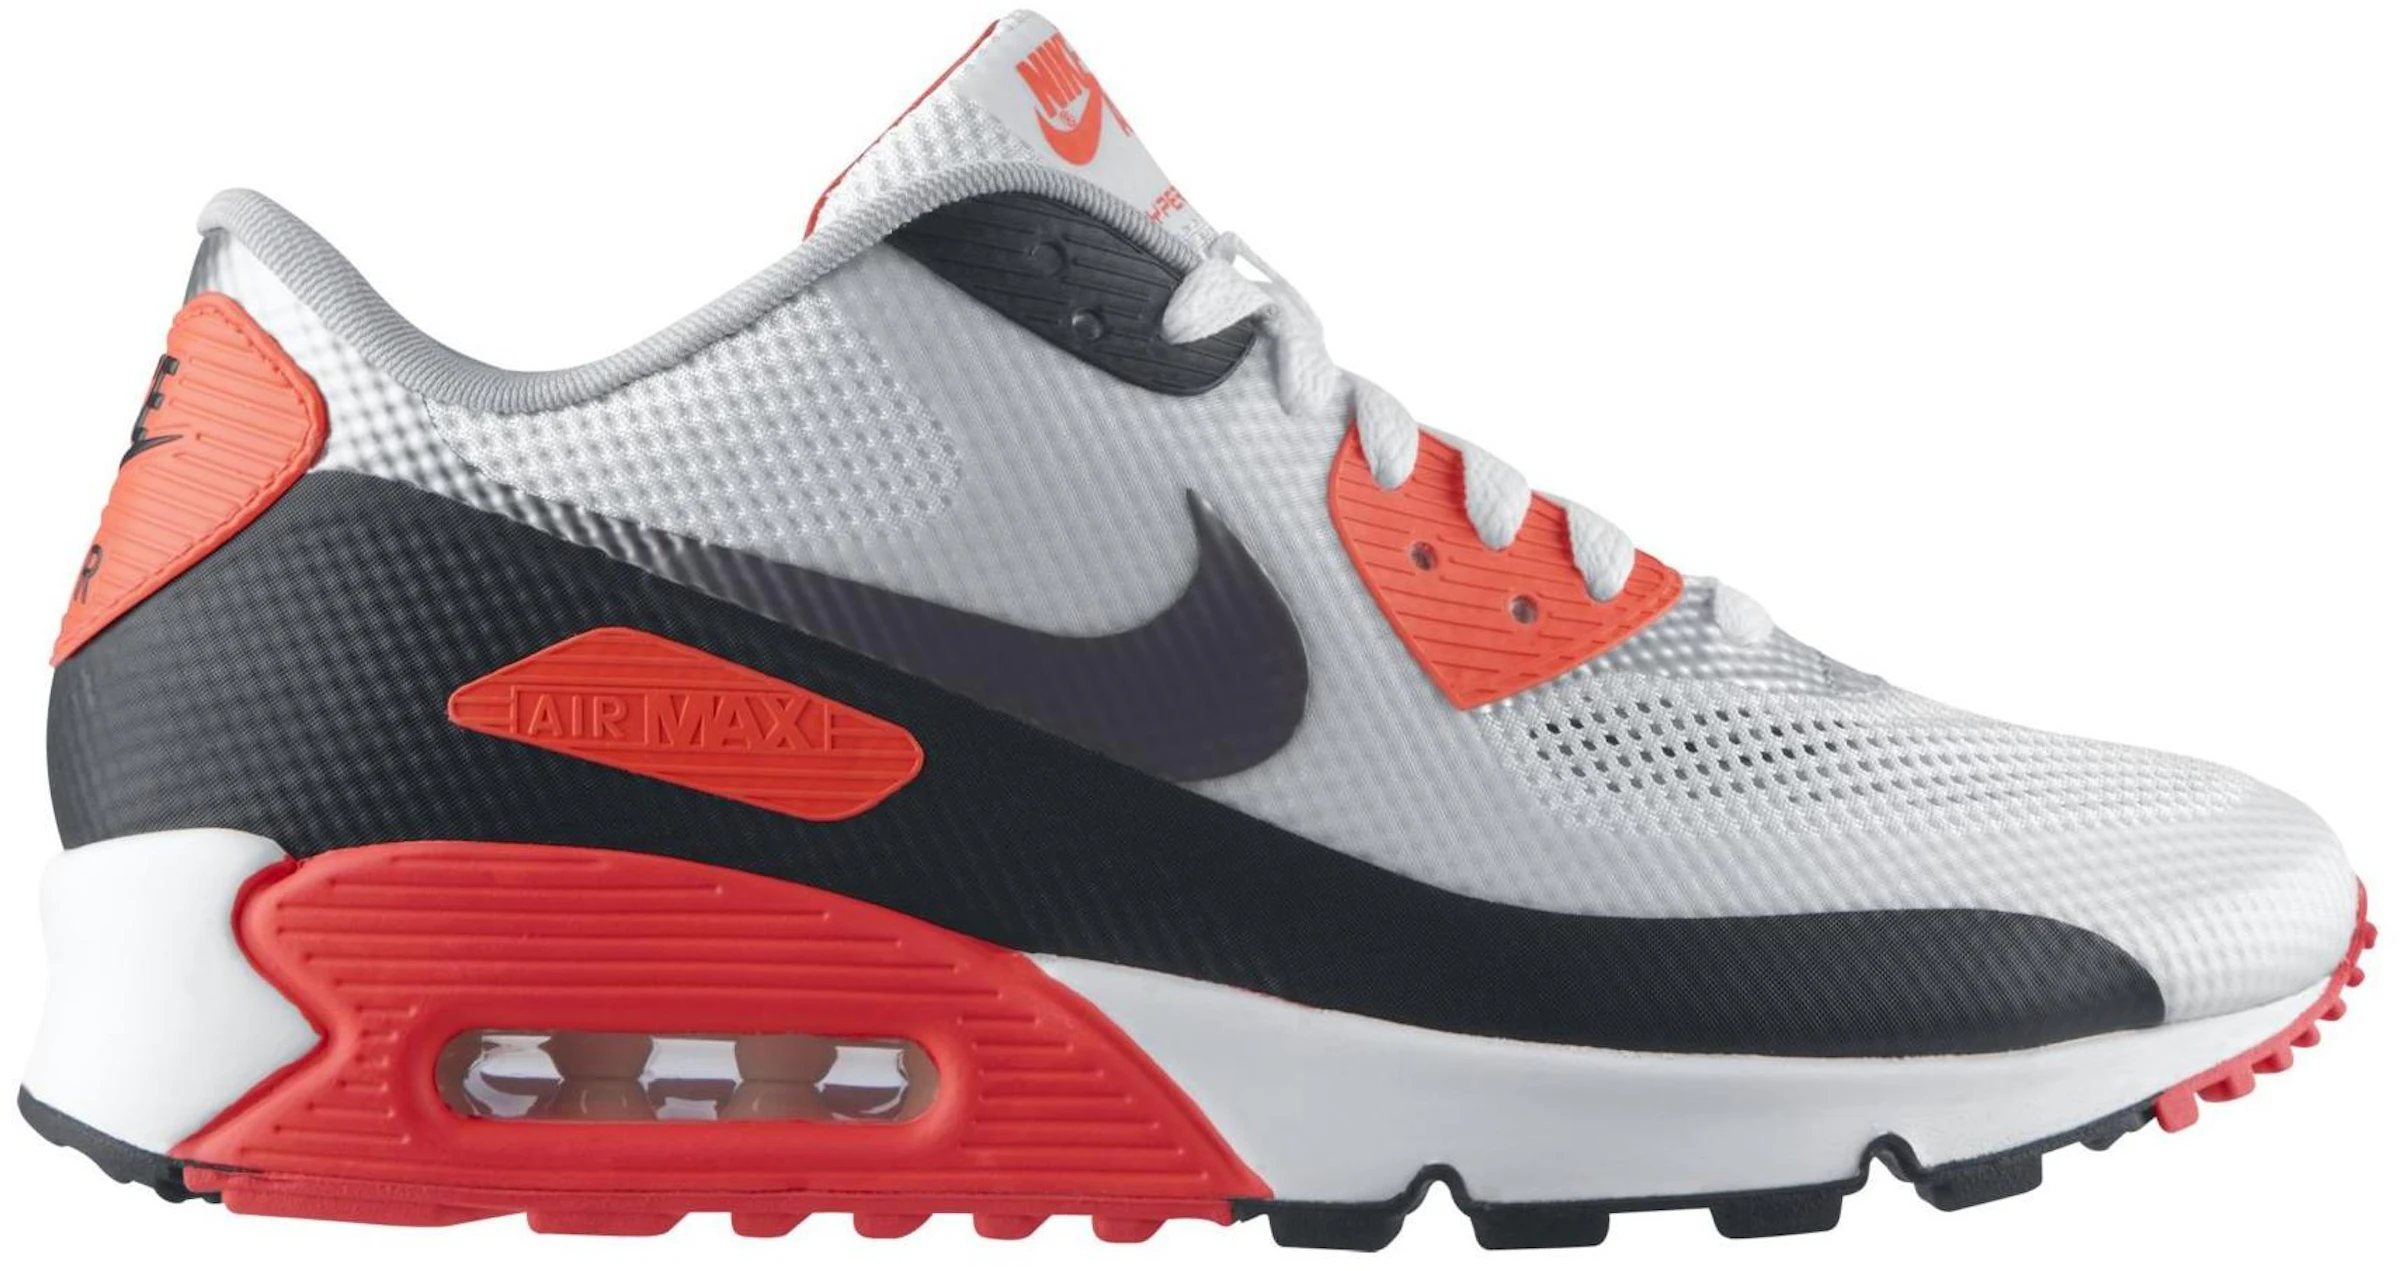 Nike Air Max 90 Hyperfuse | vlr.eng.br